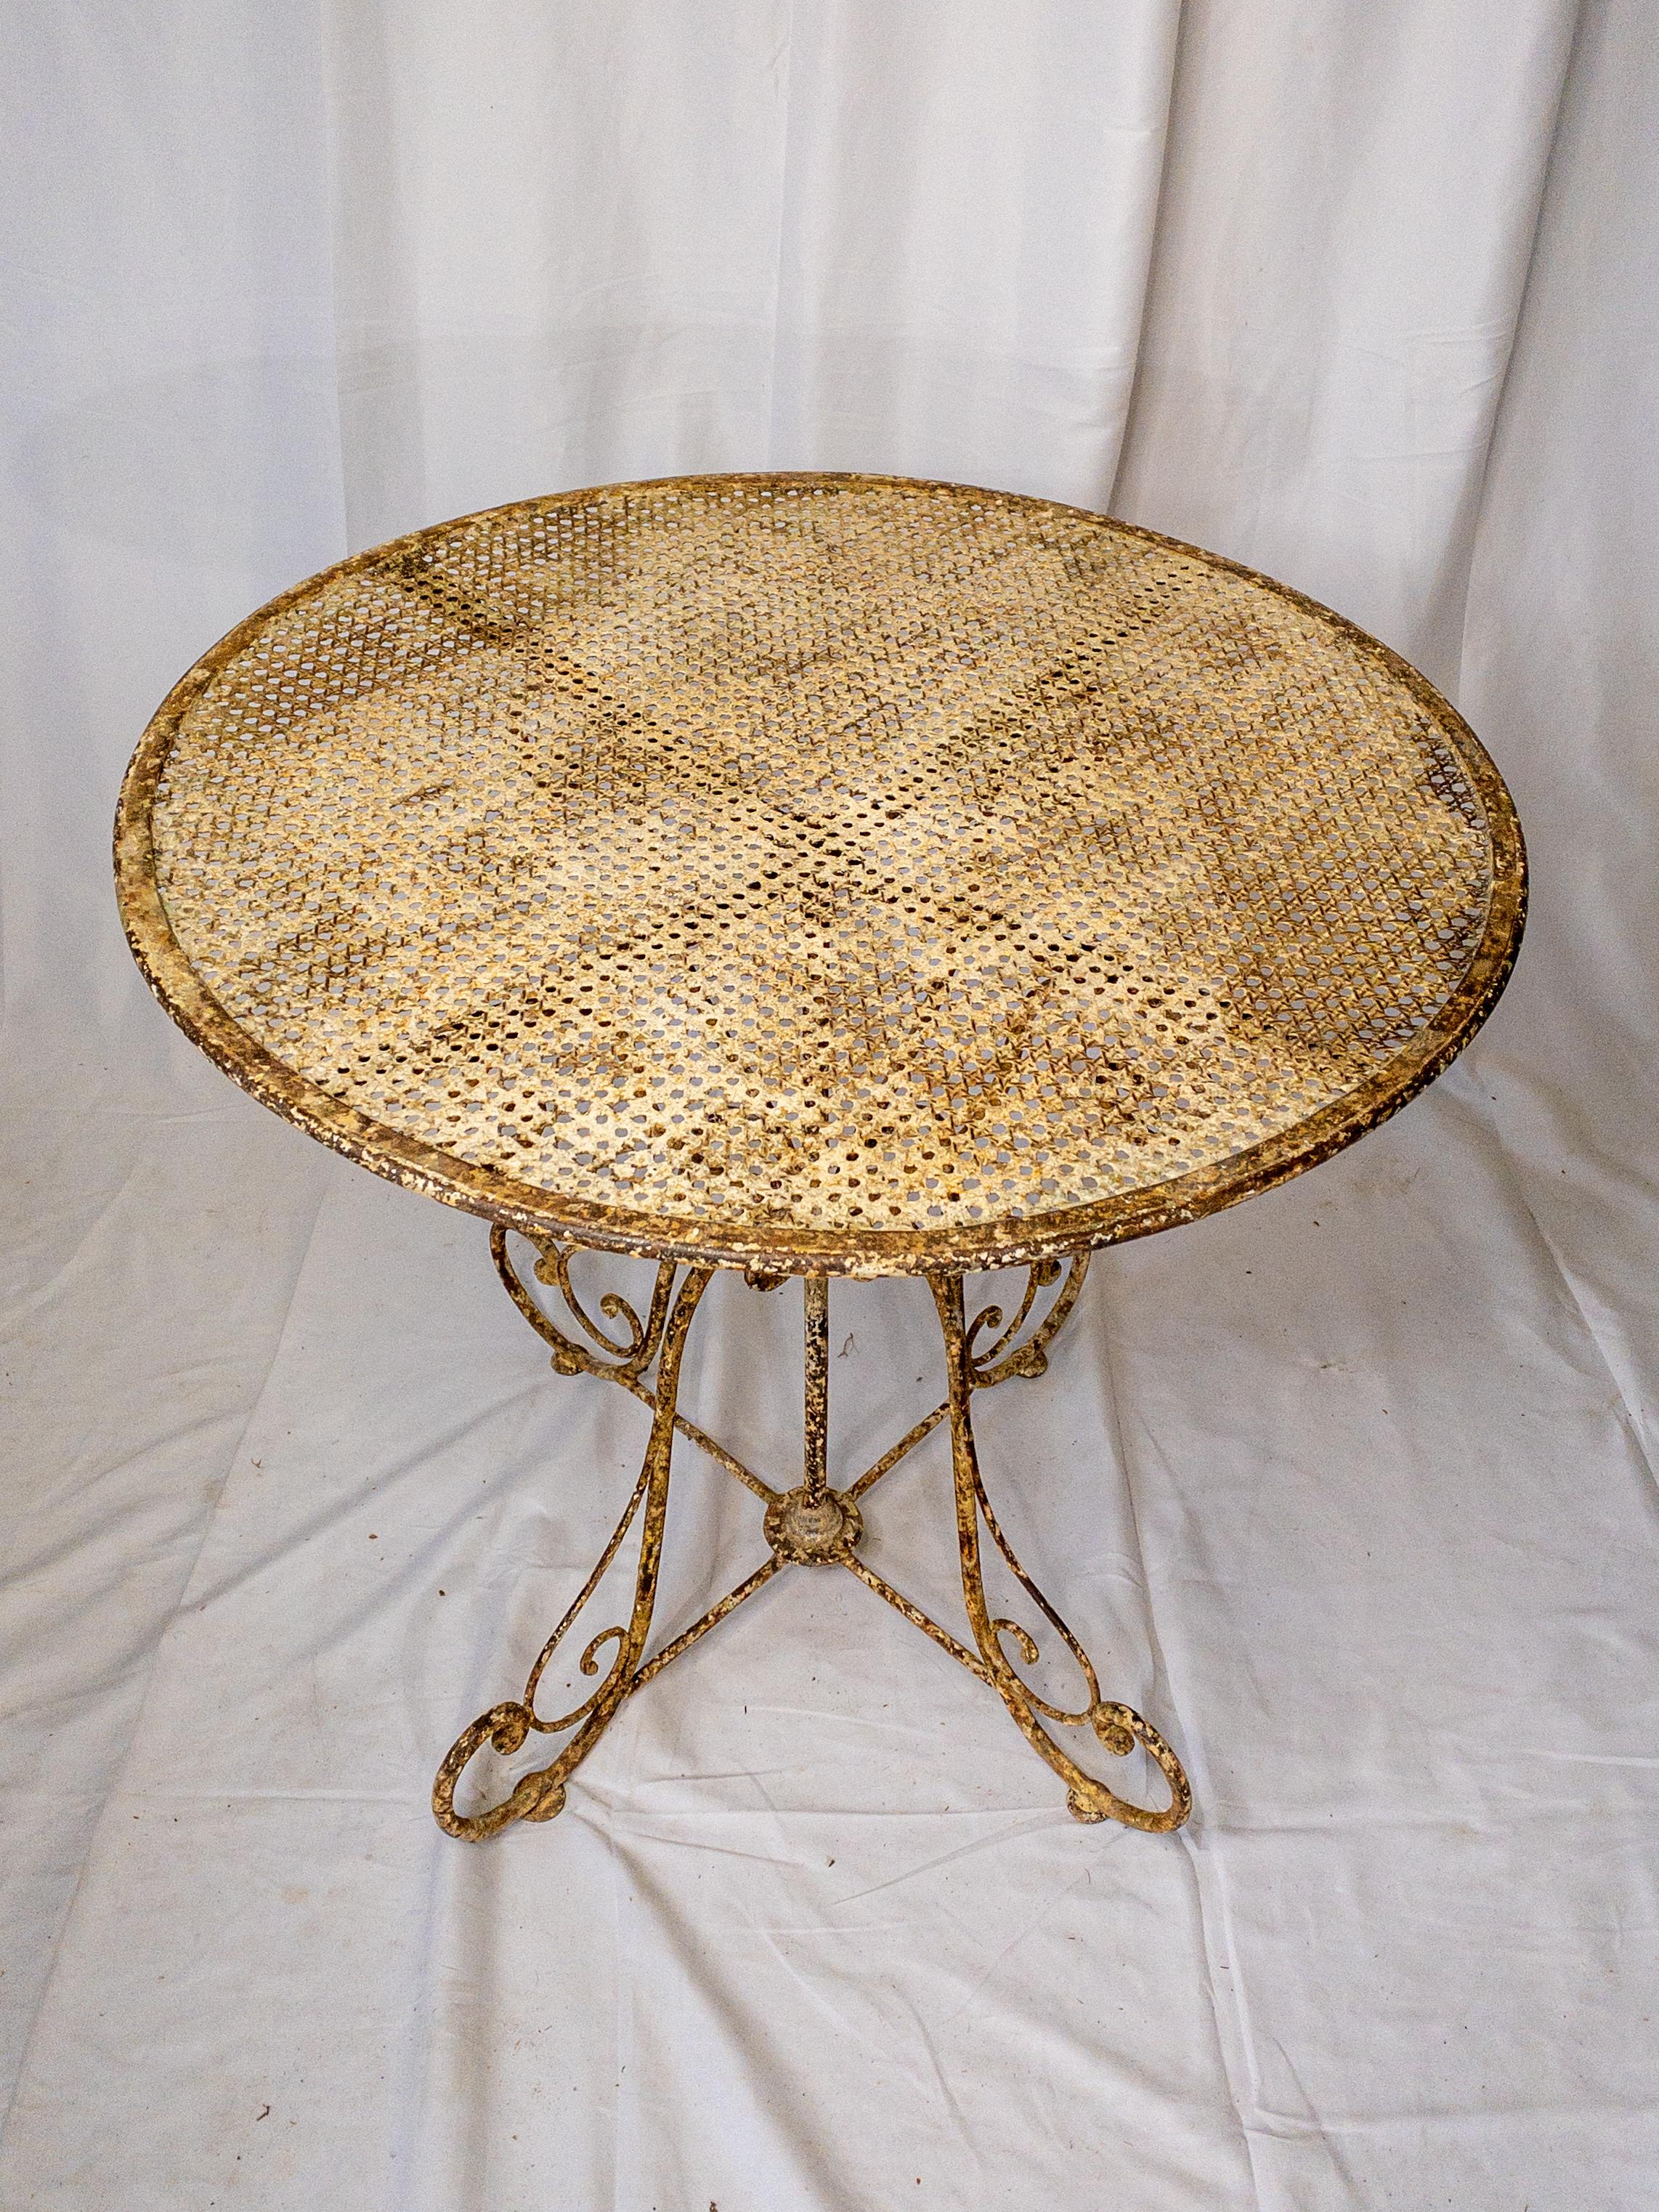 French Napoleon III Period Wrought Iron Garden Table In Good Condition For Sale In Houston, TX